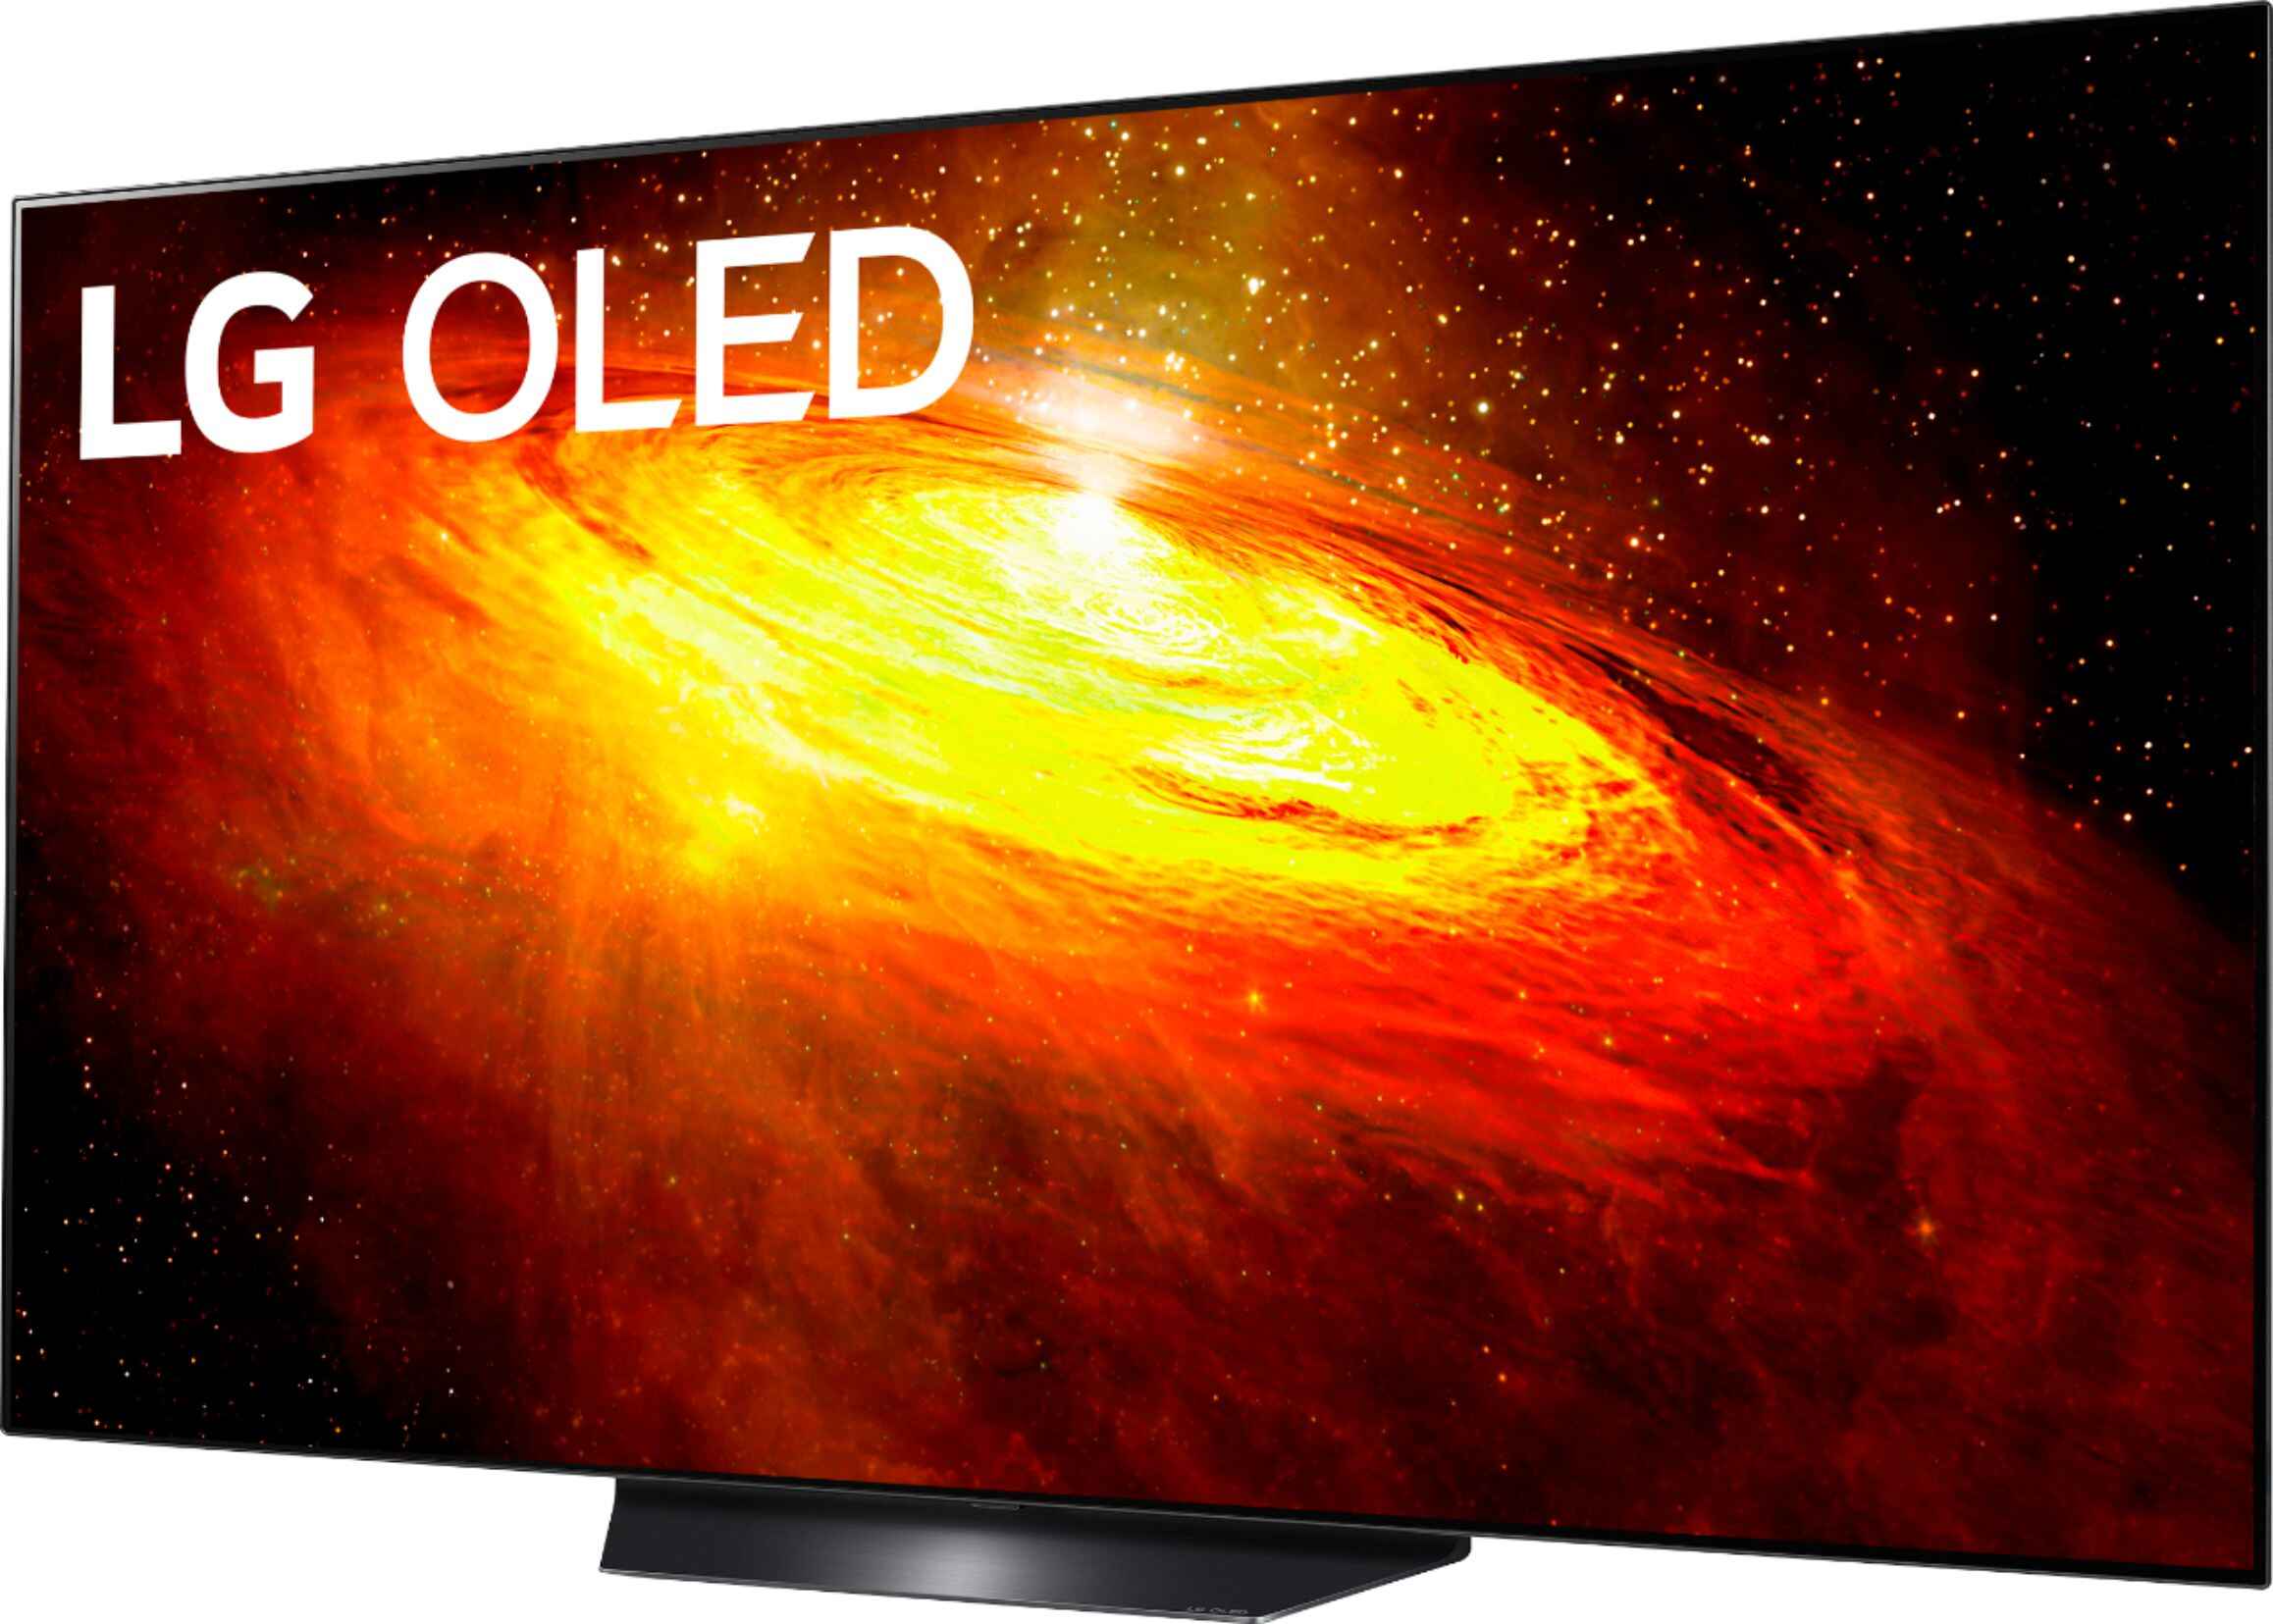 what-is-the-best-tv-mount-for-lg-65-class-64-5-diag-4k-ultra-hd-oled-tv